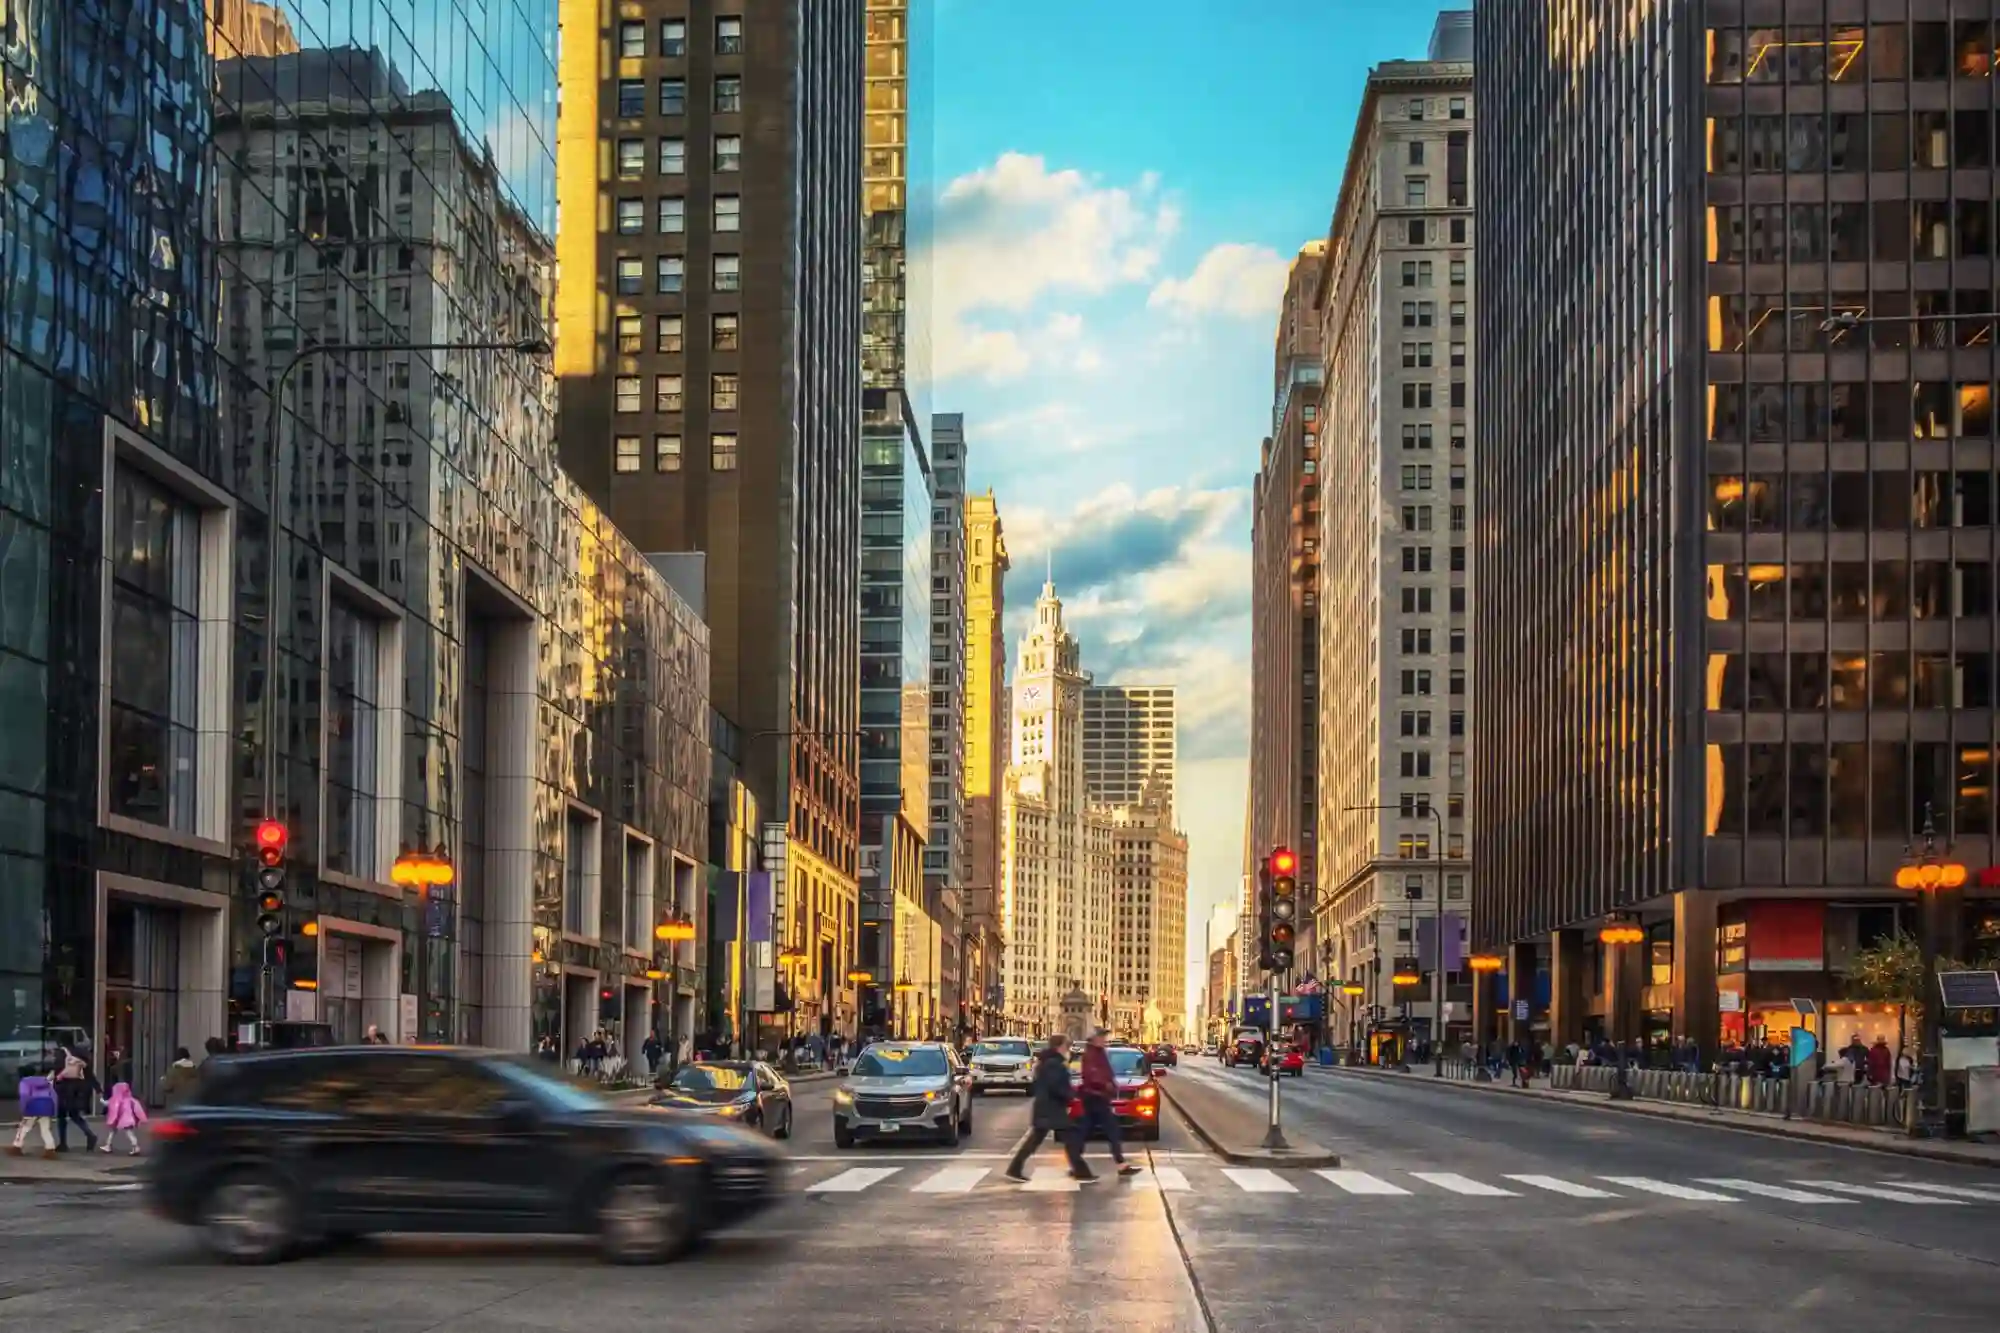 View of a busy street in the Financial District of Chicago.